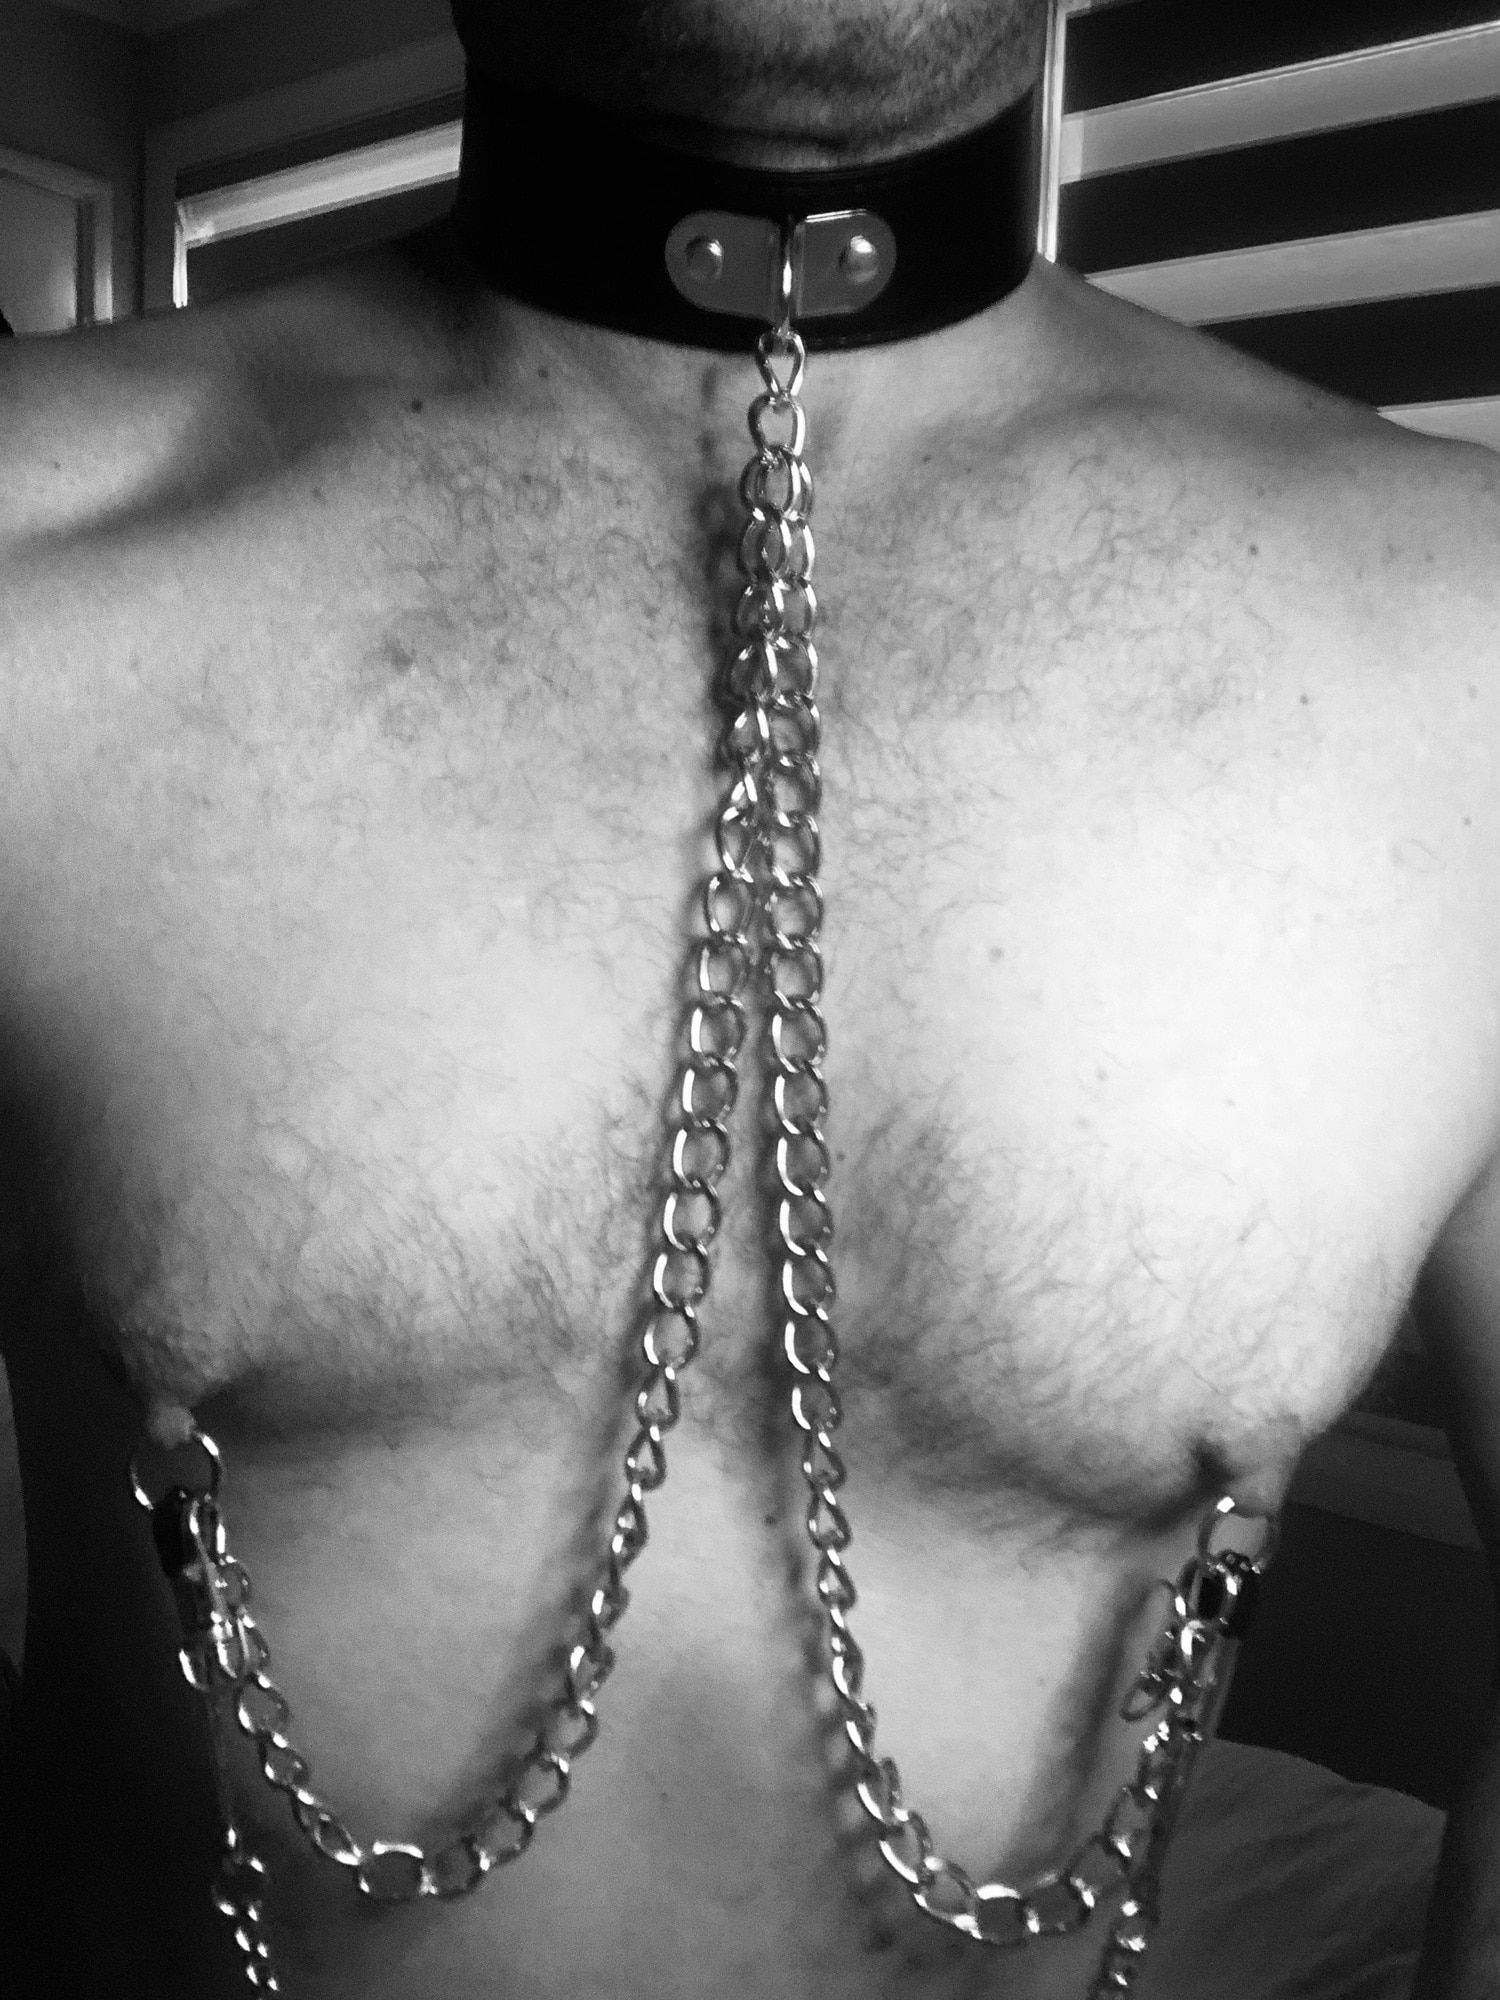 Restrained to be used by you  #4